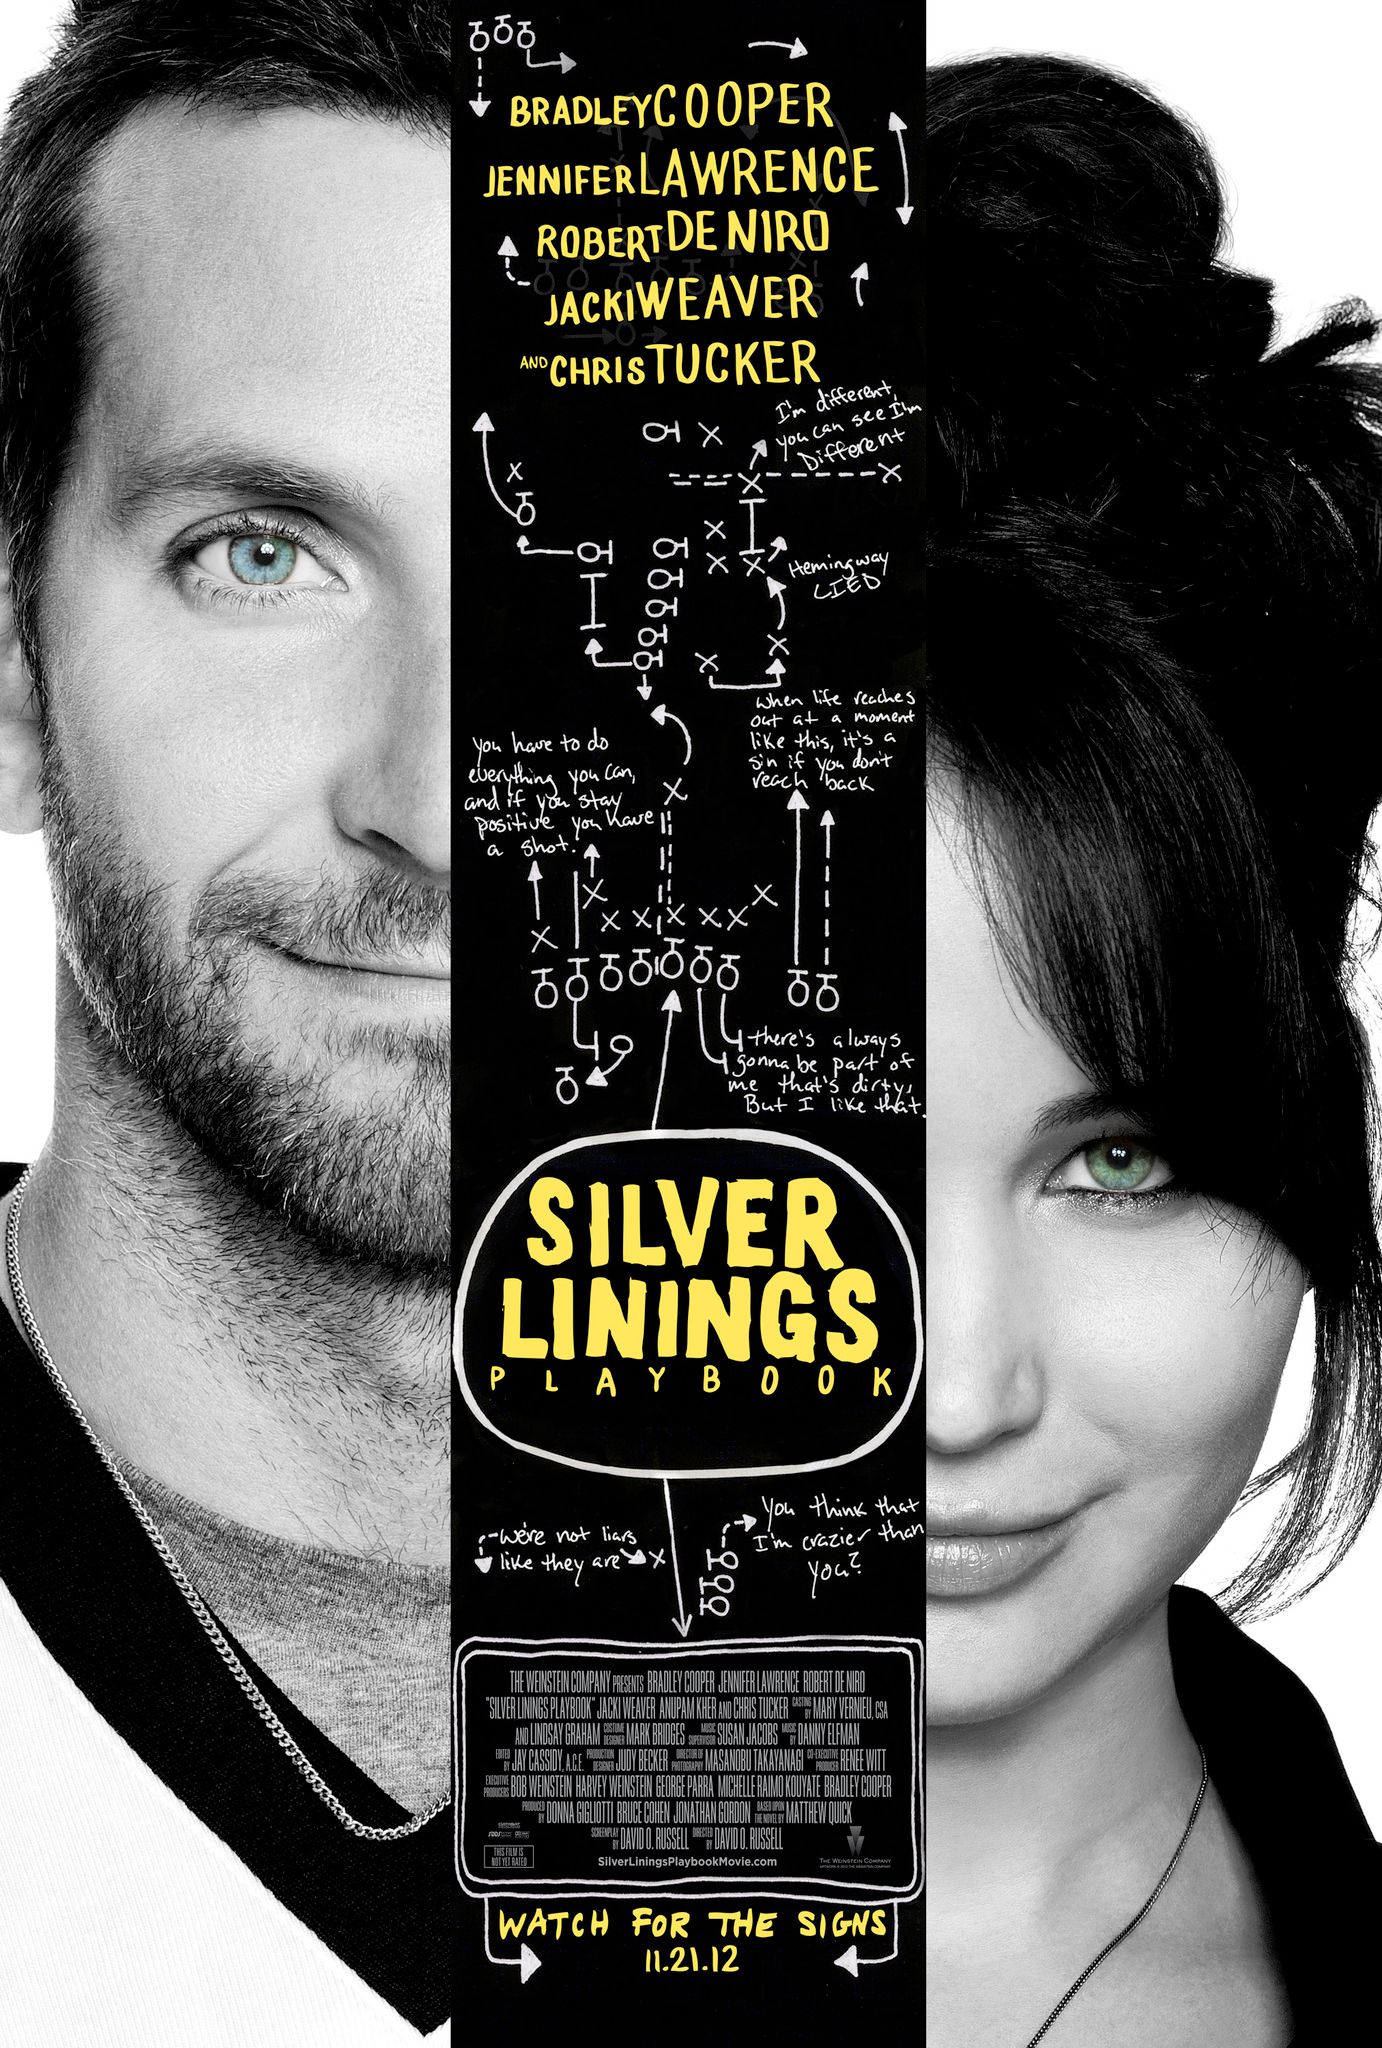 Bradley Cooper Was 'Silver Linings Playbook' Character at Super Bowl LII